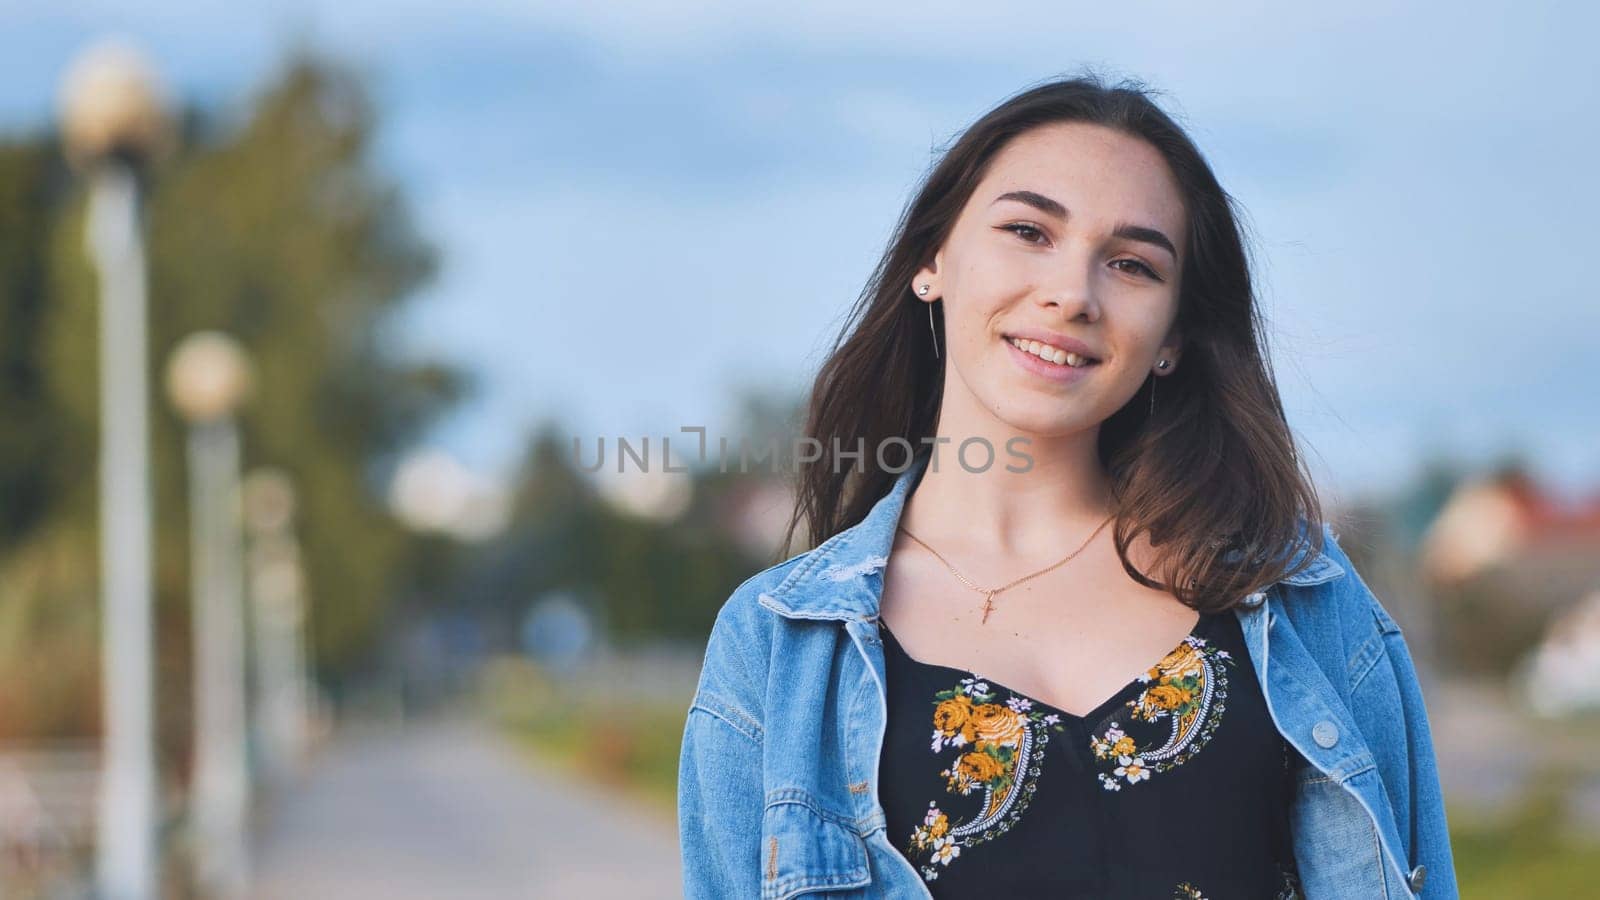 Portrait of a cheerful girl in a denim jacket at night in the city. by DovidPro